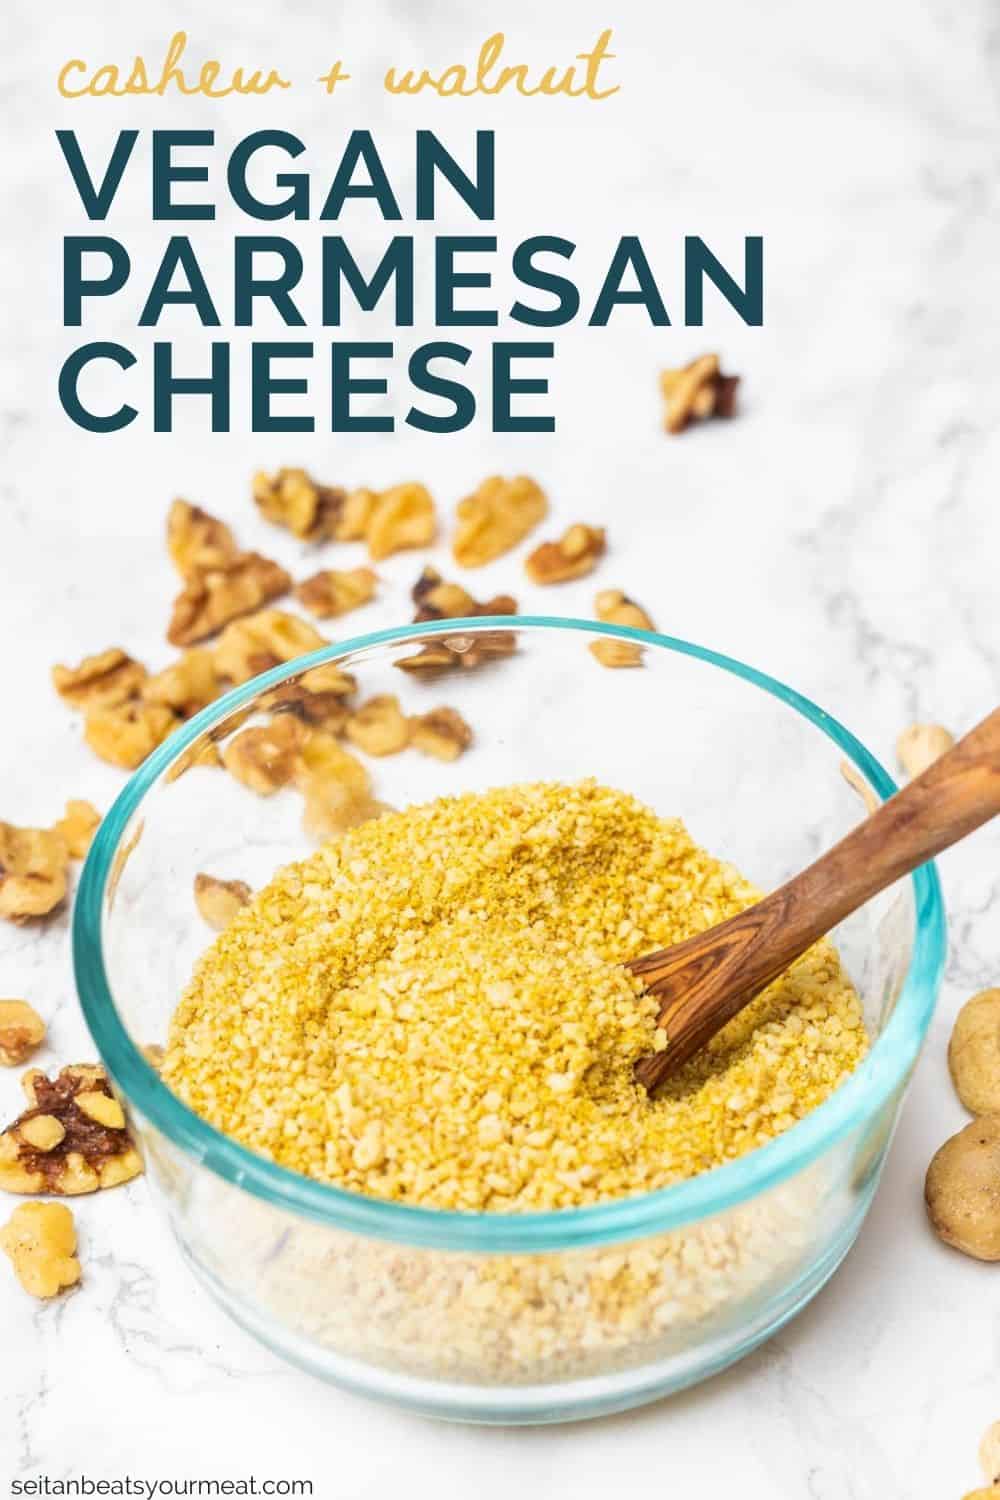 Small glass dish filled with cashew Parmesan cheese with wooden spoon with text "Cashew and Walnut Vegan Parmesan Cheese"